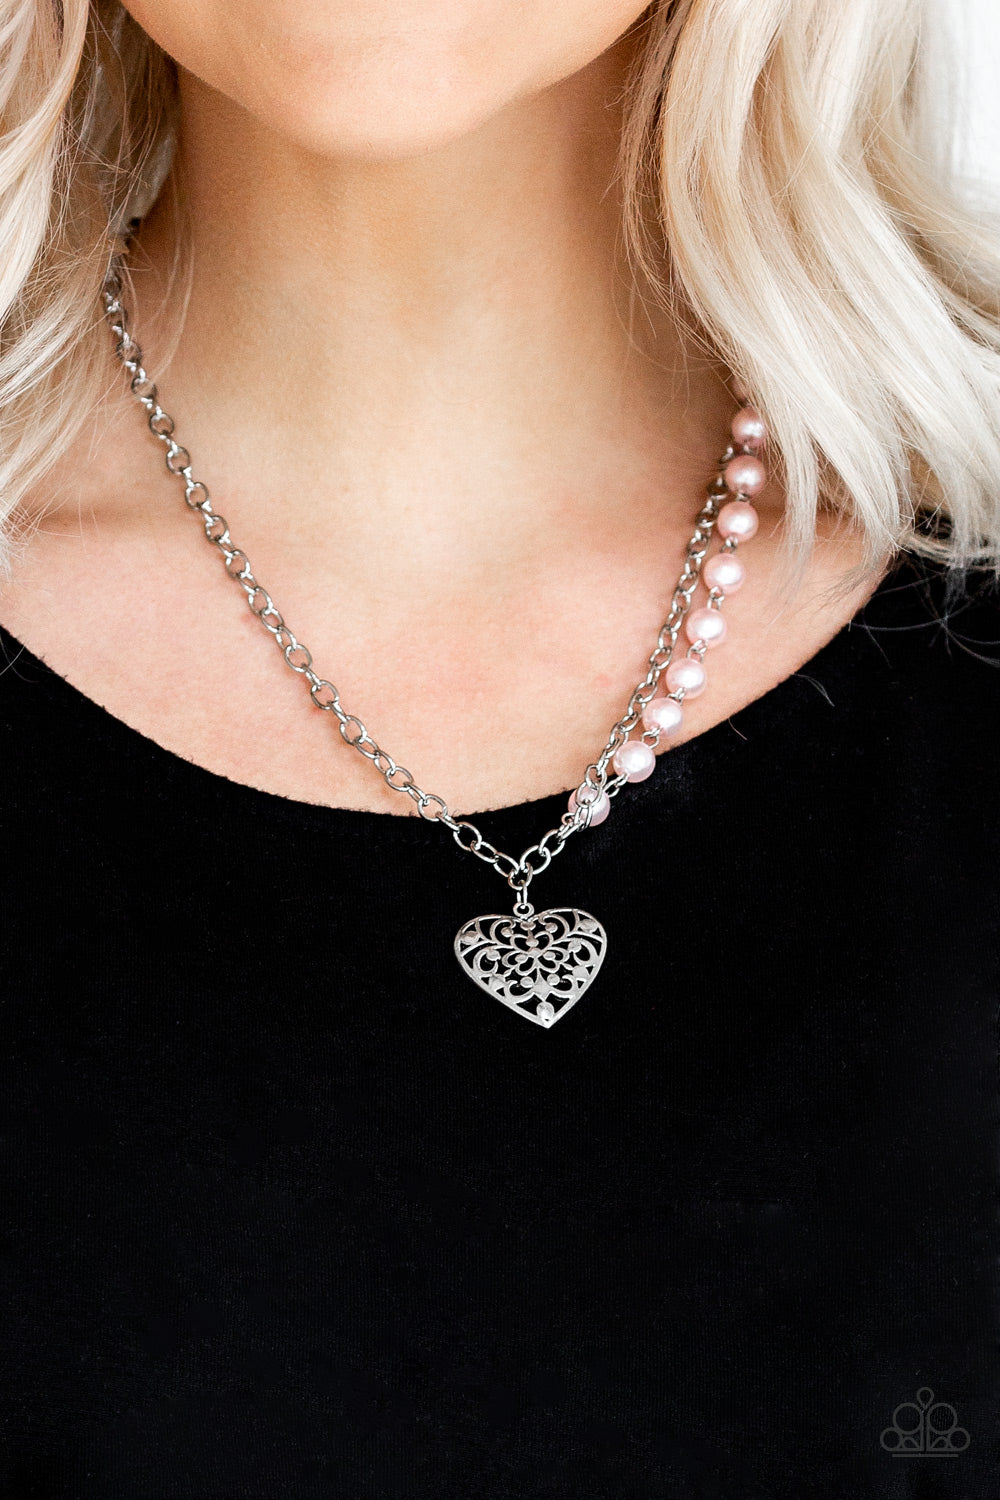 Paparazzi necklace - Forever In My Heart - Pink